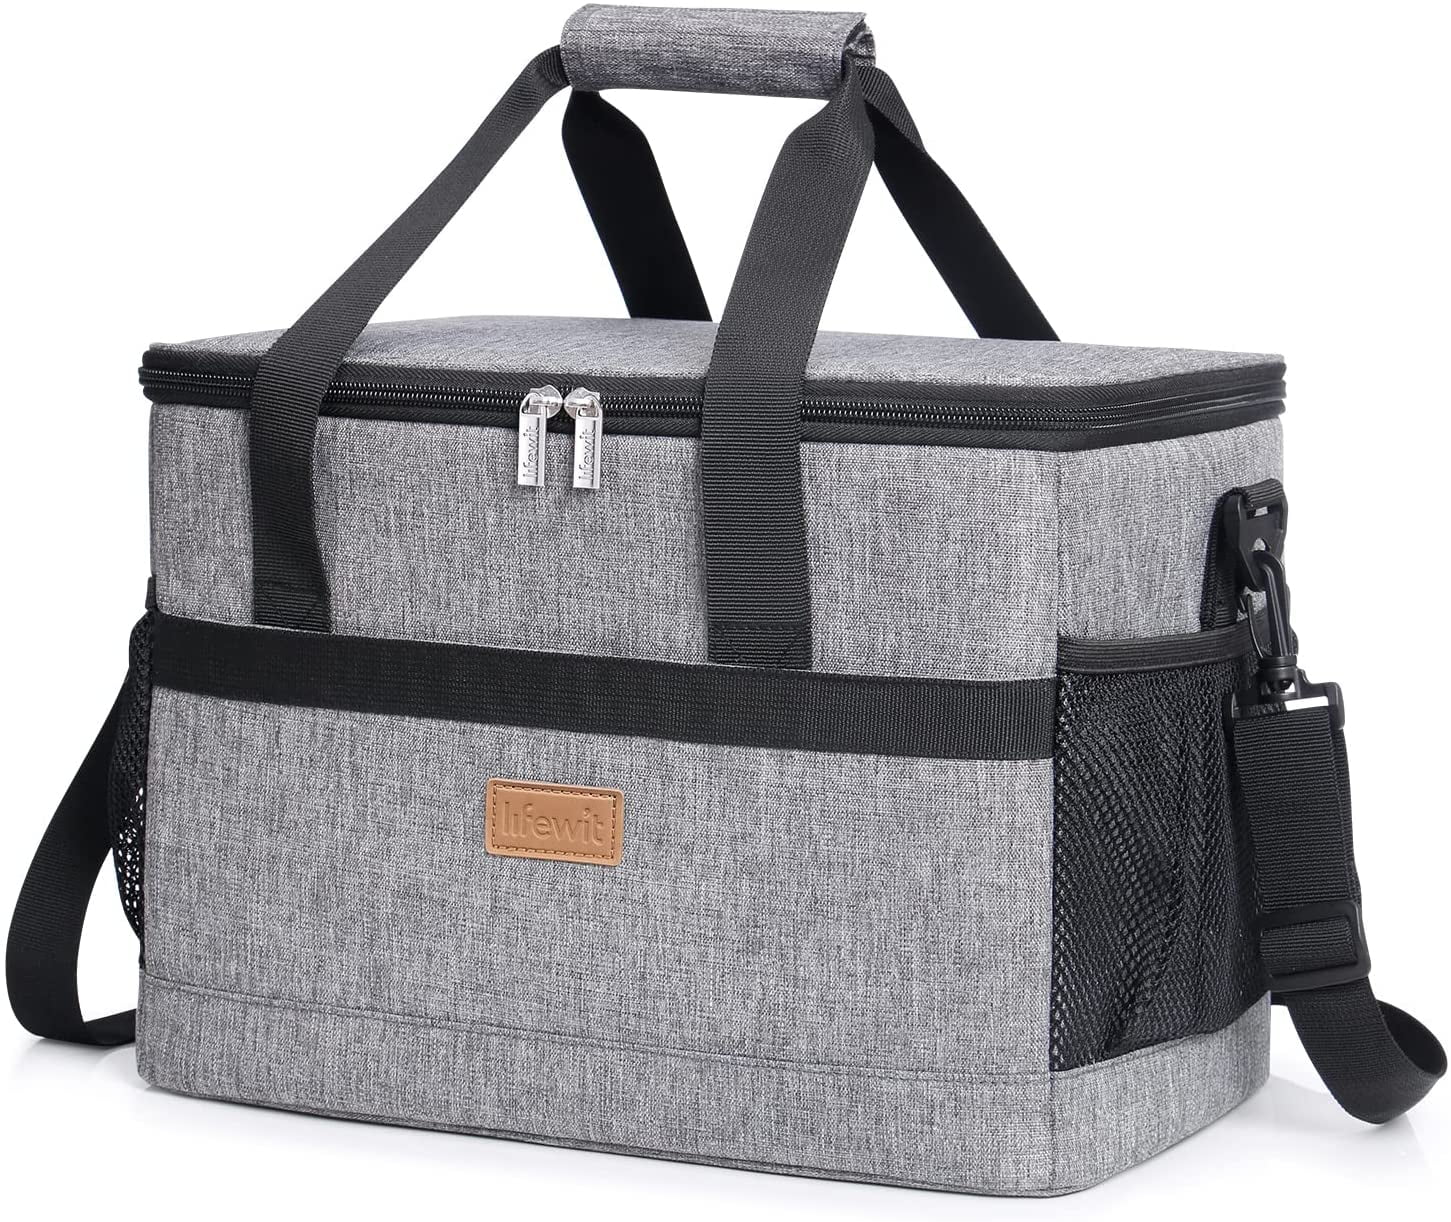 Soft Insulated Cooler Tote Bag - Lifewit – Lifewitstore